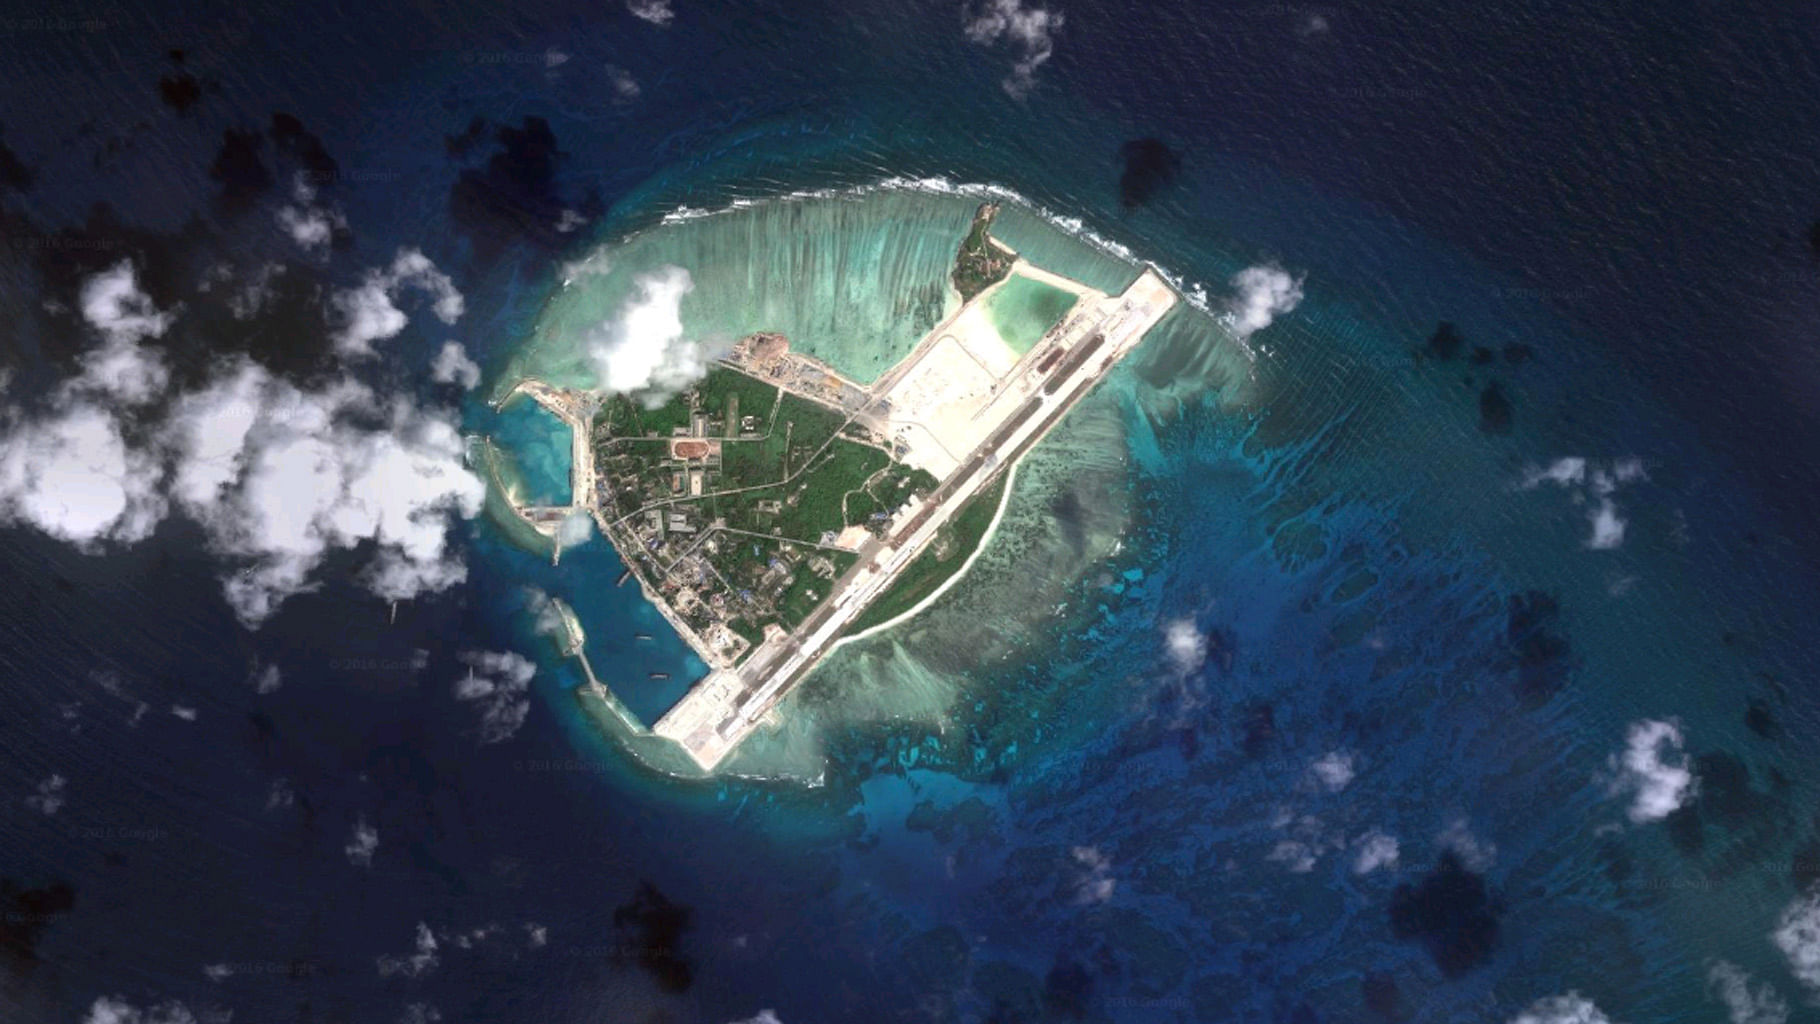 China launched the missile from the disputed Woody Island in the South China Sea. (Photo Courtesy: Google Maps)